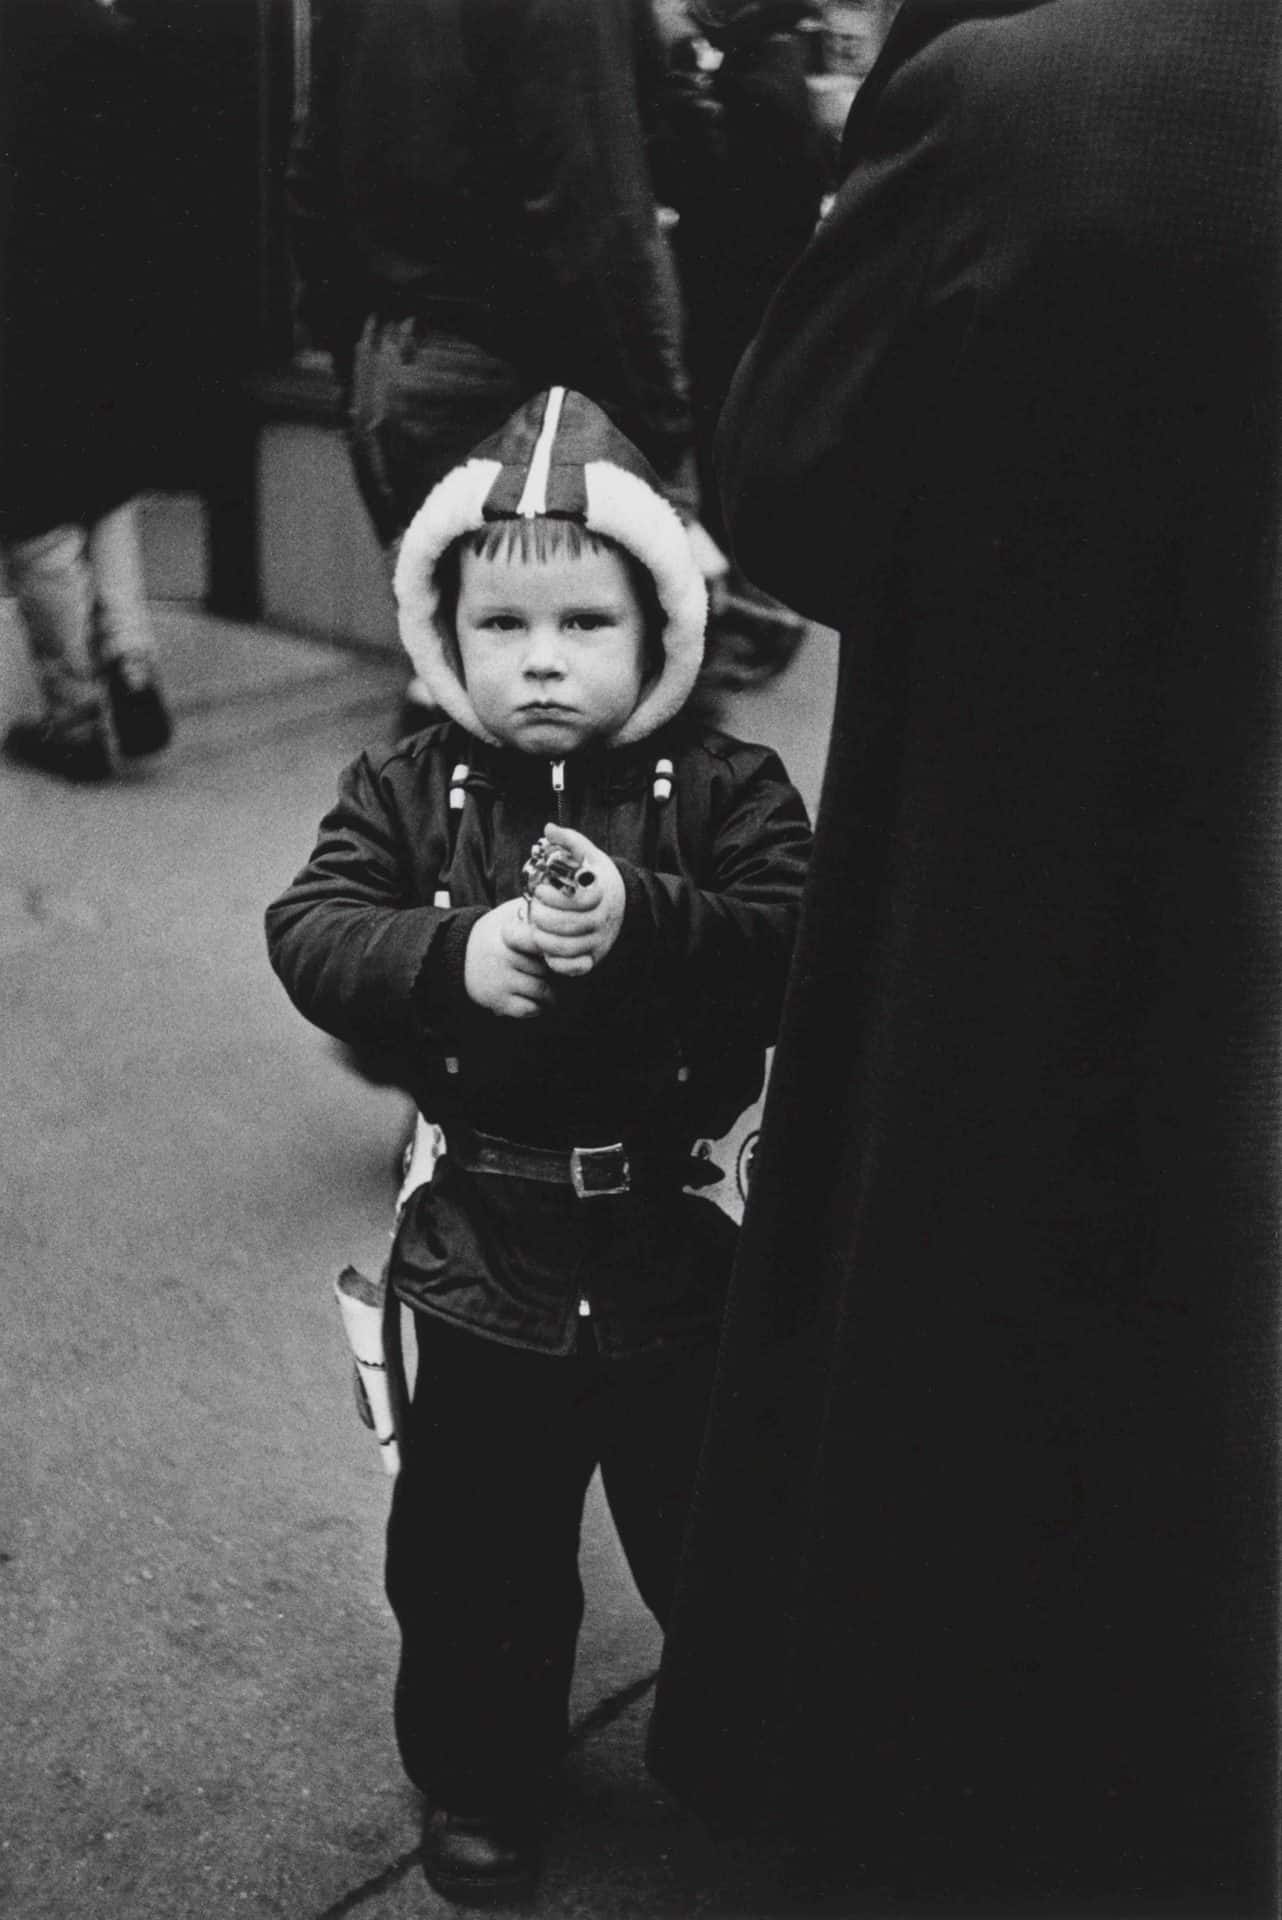 Diane Arbus. Kid in a hooded jacket aiming a gun, N.Y.C. 1957 ©The Estate of Diane Arbus, LLC. All rights reserved.